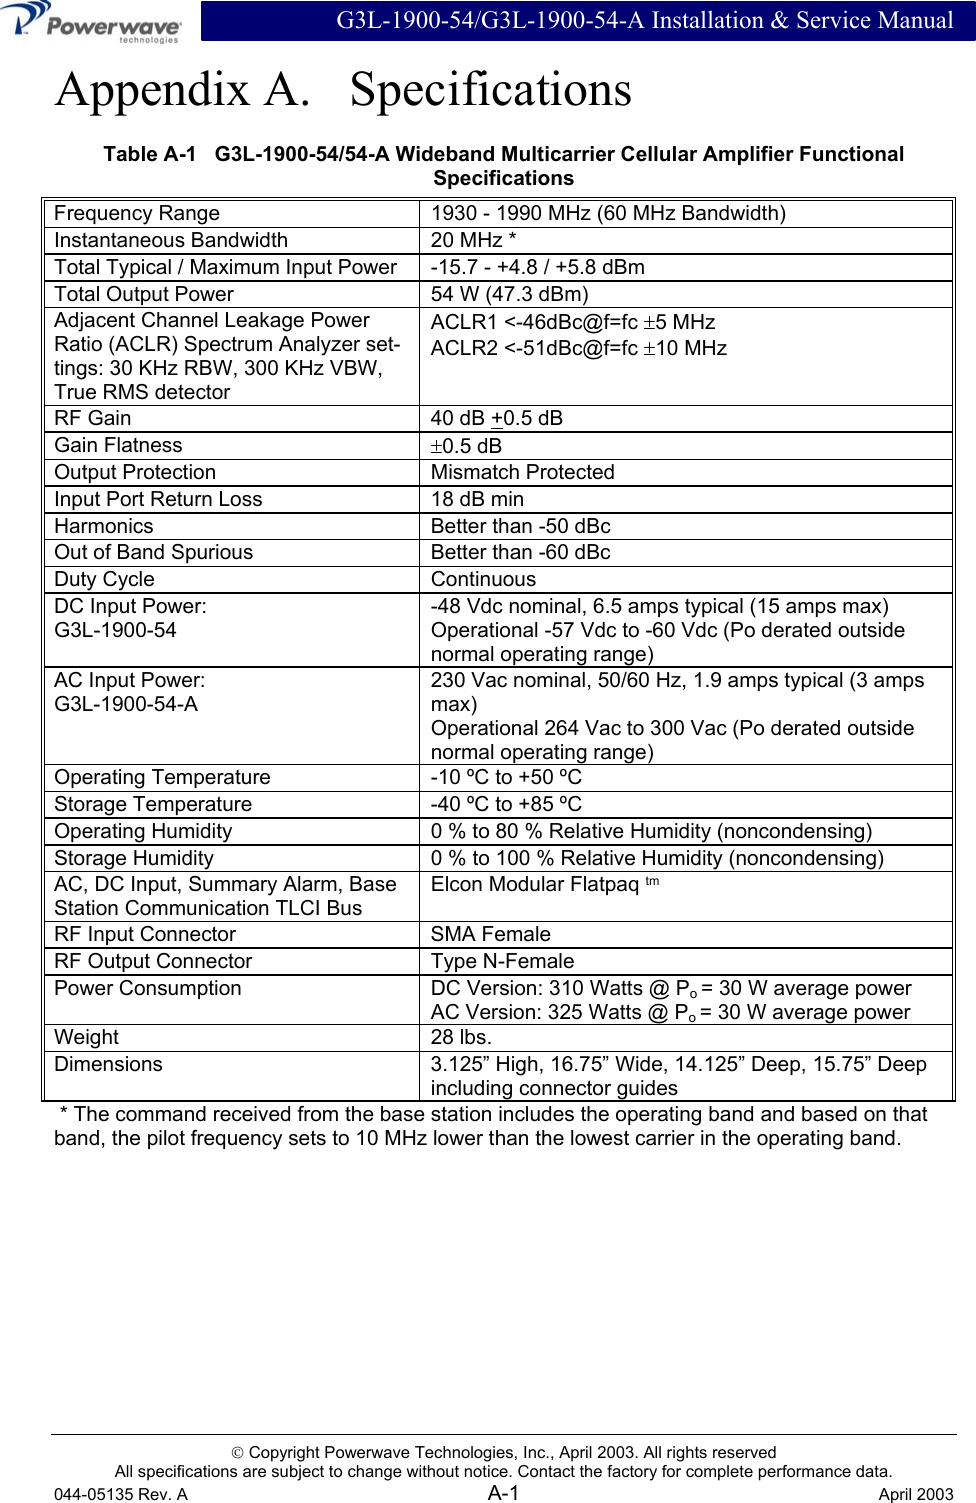  G3L-1900-54/G3L-1900-54-A Installation &amp; Service Manual  Copyright Powerwave Technologies, Inc., April 2003. All rights reserved All specifications are subject to change without notice. Contact the factory for complete performance data. 044-05135 Rev. A A-1  April 2003 Appendix A.   Specifications Table A-1   G3L-1900-54/54-A Wideband Multicarrier Cellular Amplifier Functional Specifications Frequency Range  1930 - 1990 MHz (60 MHz Bandwidth) Instantaneous Bandwidth  20 MHz * Total Typical / Maximum Input Power  -15.7 - +4.8 / +5.8 dBm  Total Output Power  54 W (47.3 dBm)  Adjacent Channel Leakage Power Ratio (ACLR) Spectrum Analyzer set-tings: 30 KHz RBW, 300 KHz VBW, True RMS detector ACLR1 &lt;-46dBc@f=fc ±5 MHz ACLR2 &lt;-51dBc@f=fc ±10 MHz RF Gain   40 dB +0.5 dB Gain Flatness  ±0.5 dB  Output Protection  Mismatch Protected Input Port Return Loss  18 dB min Harmonics  Better than -50 dBc Out of Band Spurious  Better than -60 dBc Duty Cycle  Continuous DC Input Power: G3L-1900-54 -48 Vdc nominal, 6.5 amps typical (15 amps max) Operational -57 Vdc to -60 Vdc (Po derated outside normal operating range) AC Input Power: G3L-1900-54-A 230 Vac nominal, 50/60 Hz, 1.9 amps typical (3 amps max) Operational 264 Vac to 300 Vac (Po derated outside normal operating range) Operating Temperature  -10 ºC to +50 ºC Storage Temperature  -40 ºC to +85 ºC Operating Humidity  0 % to 80 % Relative Humidity (noncondensing) Storage Humidity  0 % to 100 % Relative Humidity (noncondensing) AC, DC Input, Summary Alarm, Base Station Communication TLCI Bus Elcon Modular Flatpaq tm RF Input Connector  SMA Female RF Output Connector  Type N-Female Power Consumption  DC Version: 310 Watts @ Po = 30 W average power AC Version: 325 Watts @ Po = 30 W average power Weight 28 lbs. Dimensions  3.125” High, 16.75” Wide, 14.125” Deep, 15.75” Deep including connector guides  * The command received from the base station includes the operating band and based on that band, the pilot frequency sets to 10 MHz lower than the lowest carrier in the operating band. 